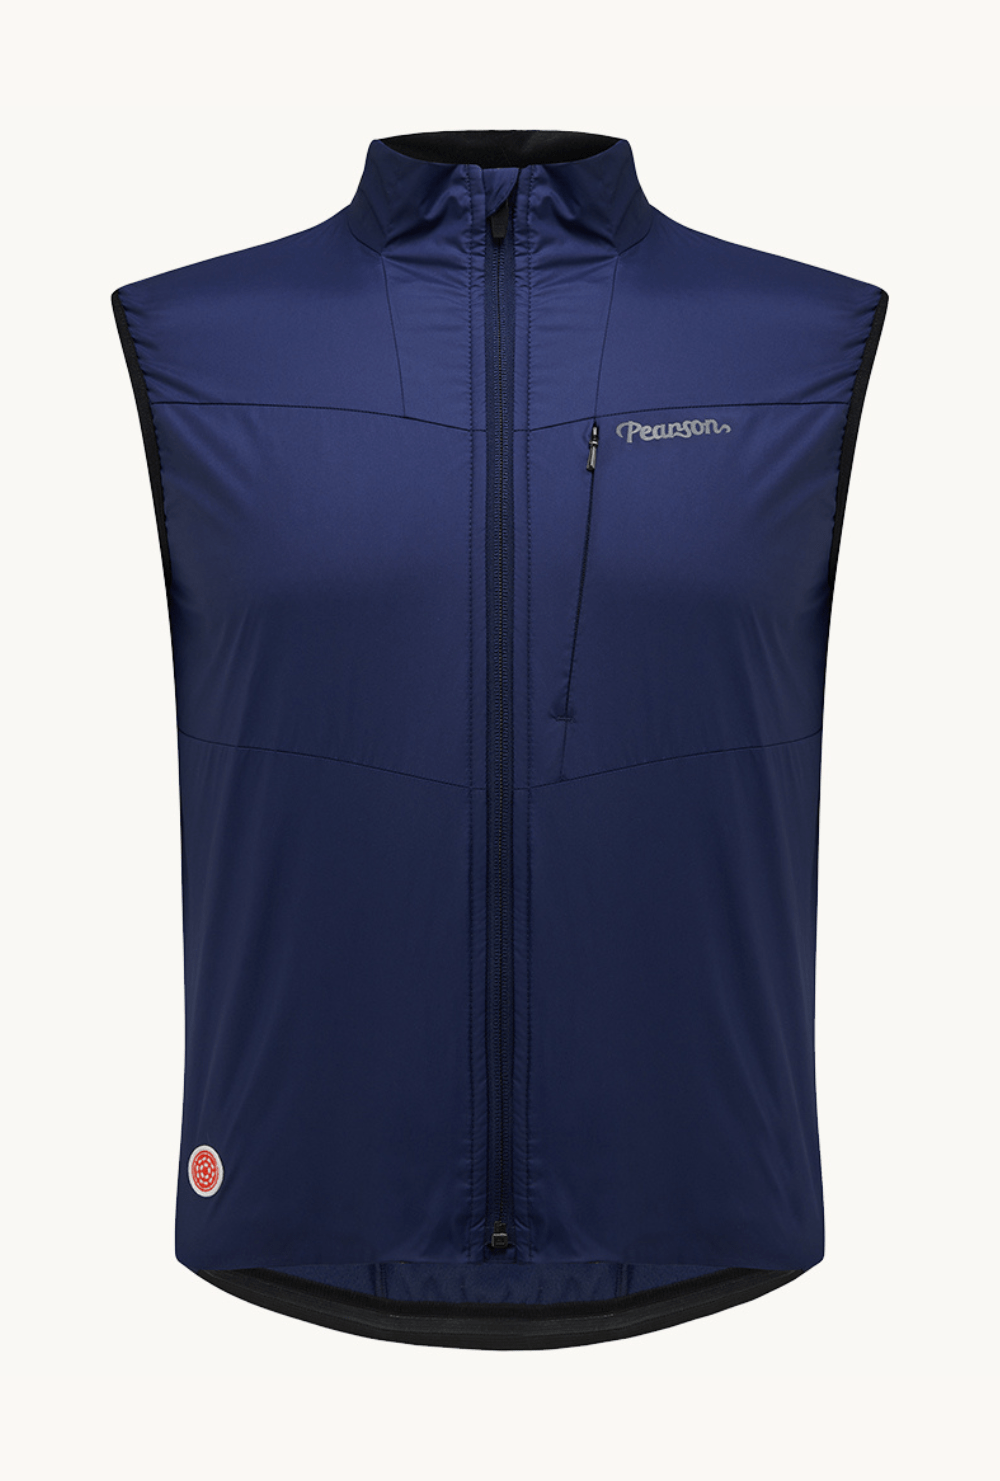 Pearson 1860  Feel The Benefits - Road Insulated Gilet Blue Ink  Medium / Blue Ink